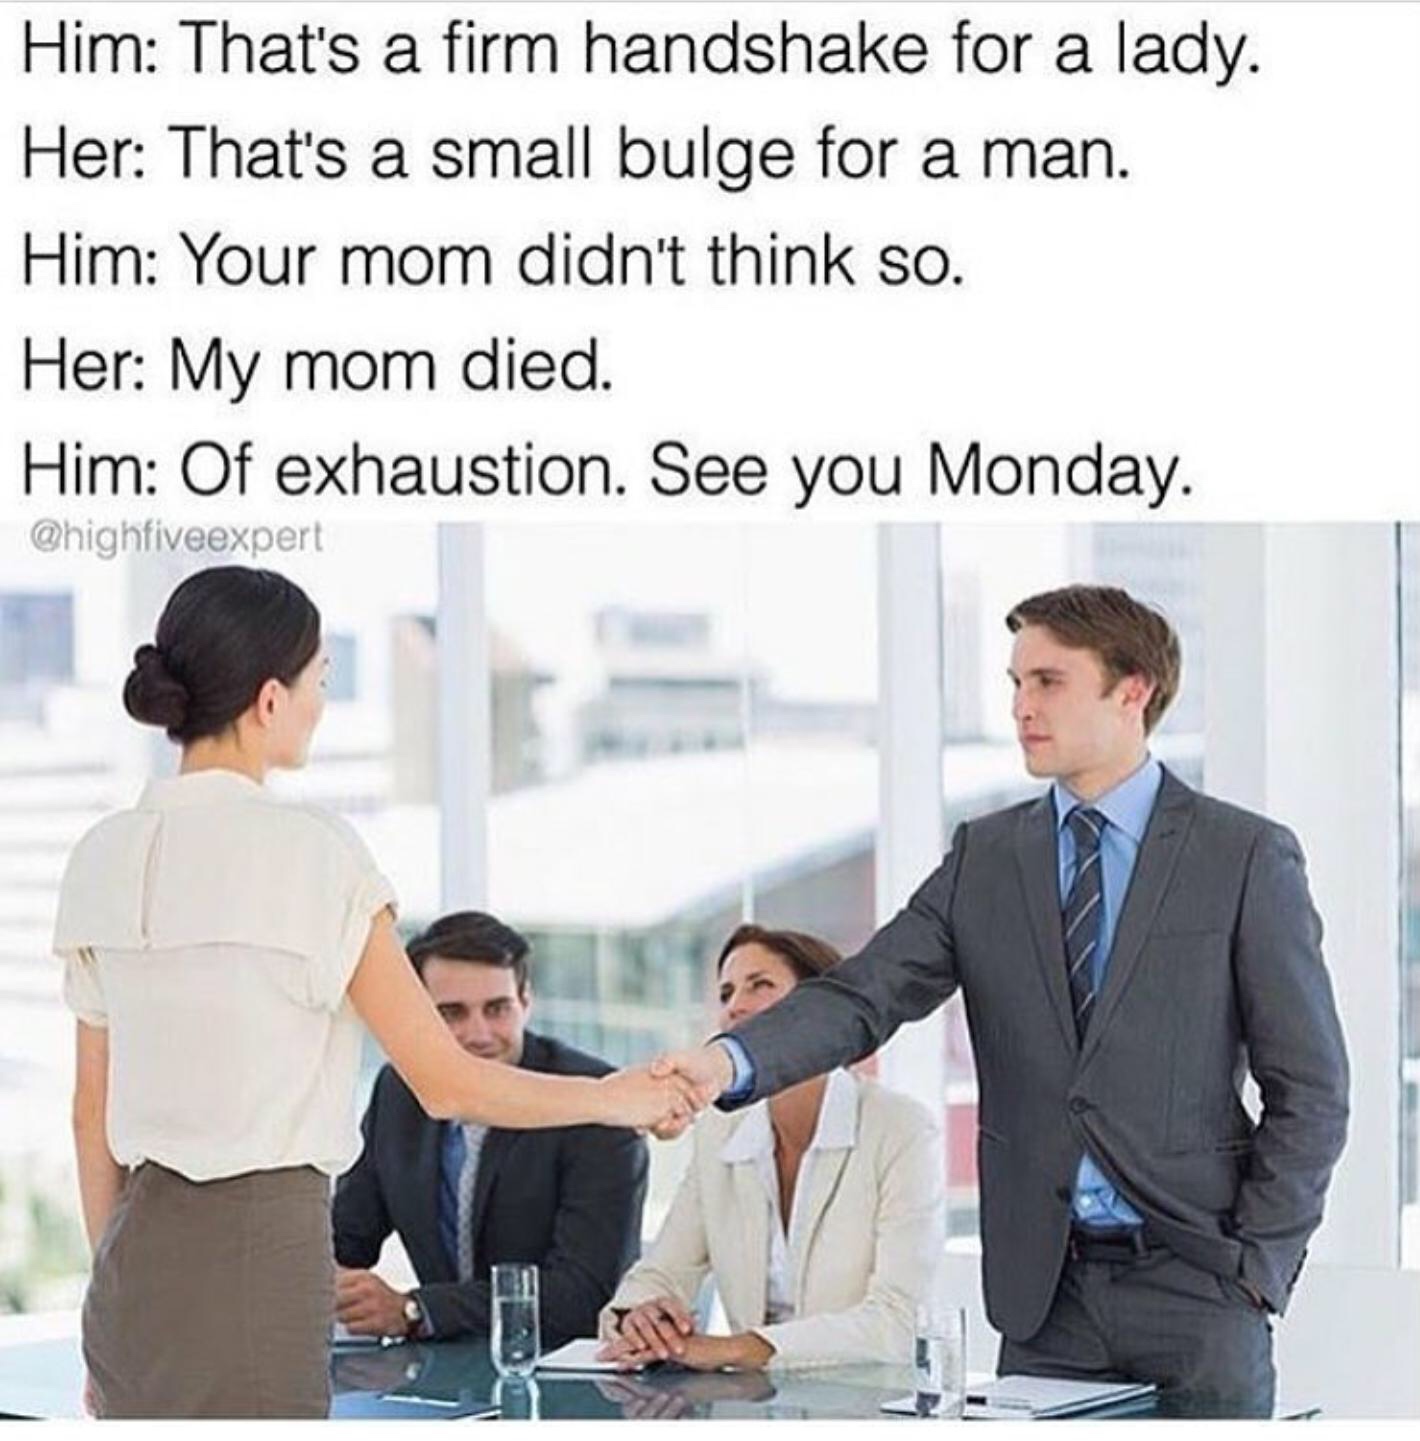 that's a firm handshake for a lady - Him That's a firm handshake for a lady. Her That's a small bulge for a man. Him Your mom didn't think so. Her My mom died. Him Of exhaustion. See you Monday.